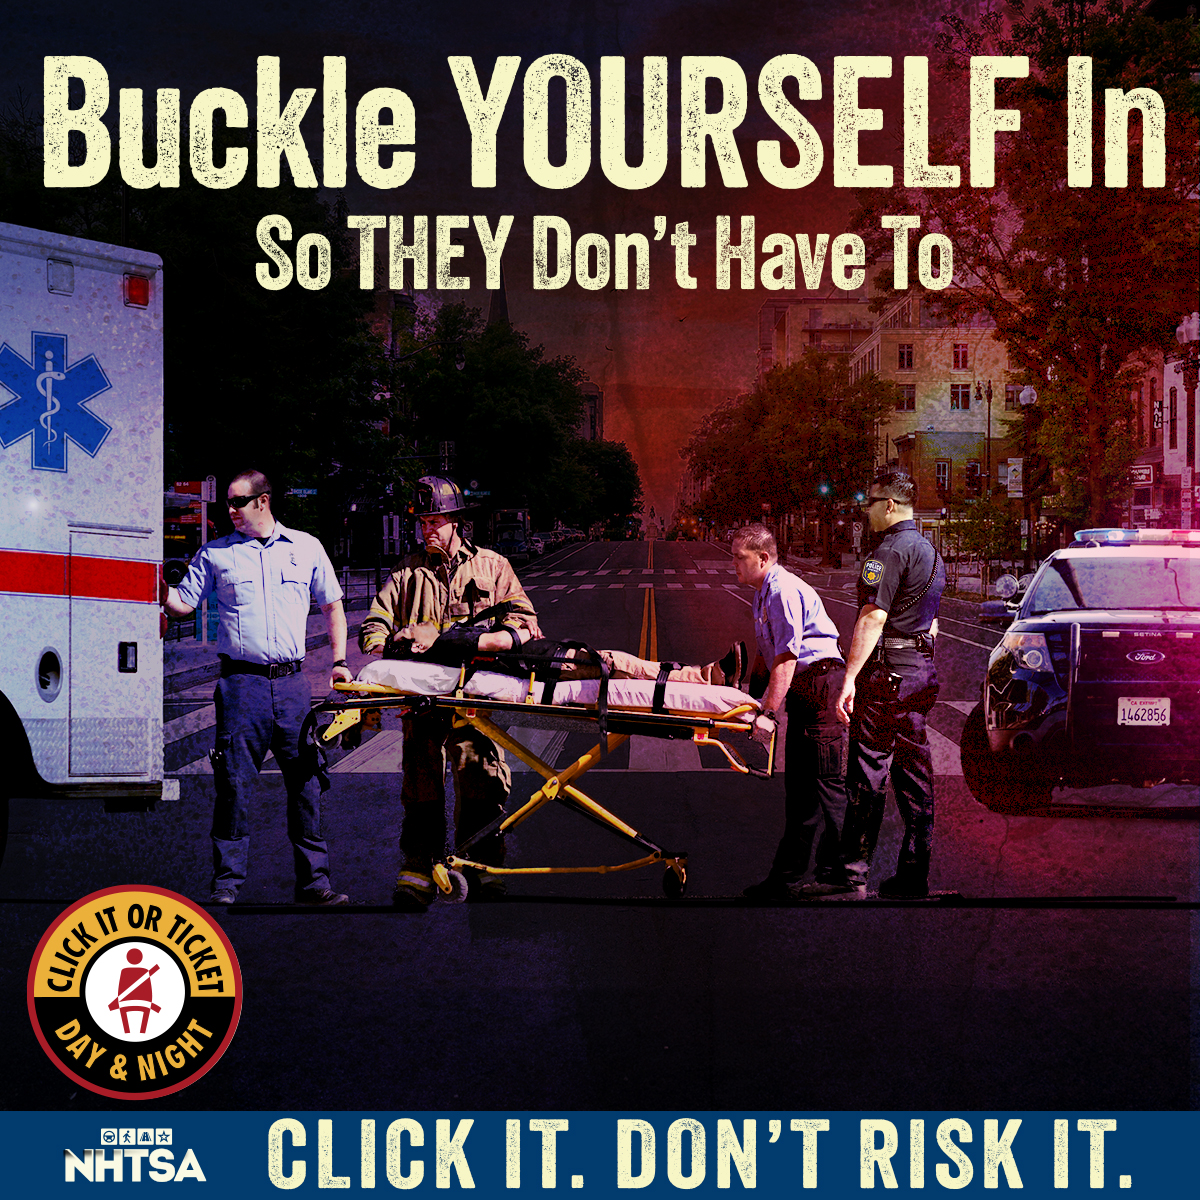 Your seat belt doesn’t just protect you in a crash. It could save you from a ticket, too. #ClickItOrTicket #ClickItDontRiskIt